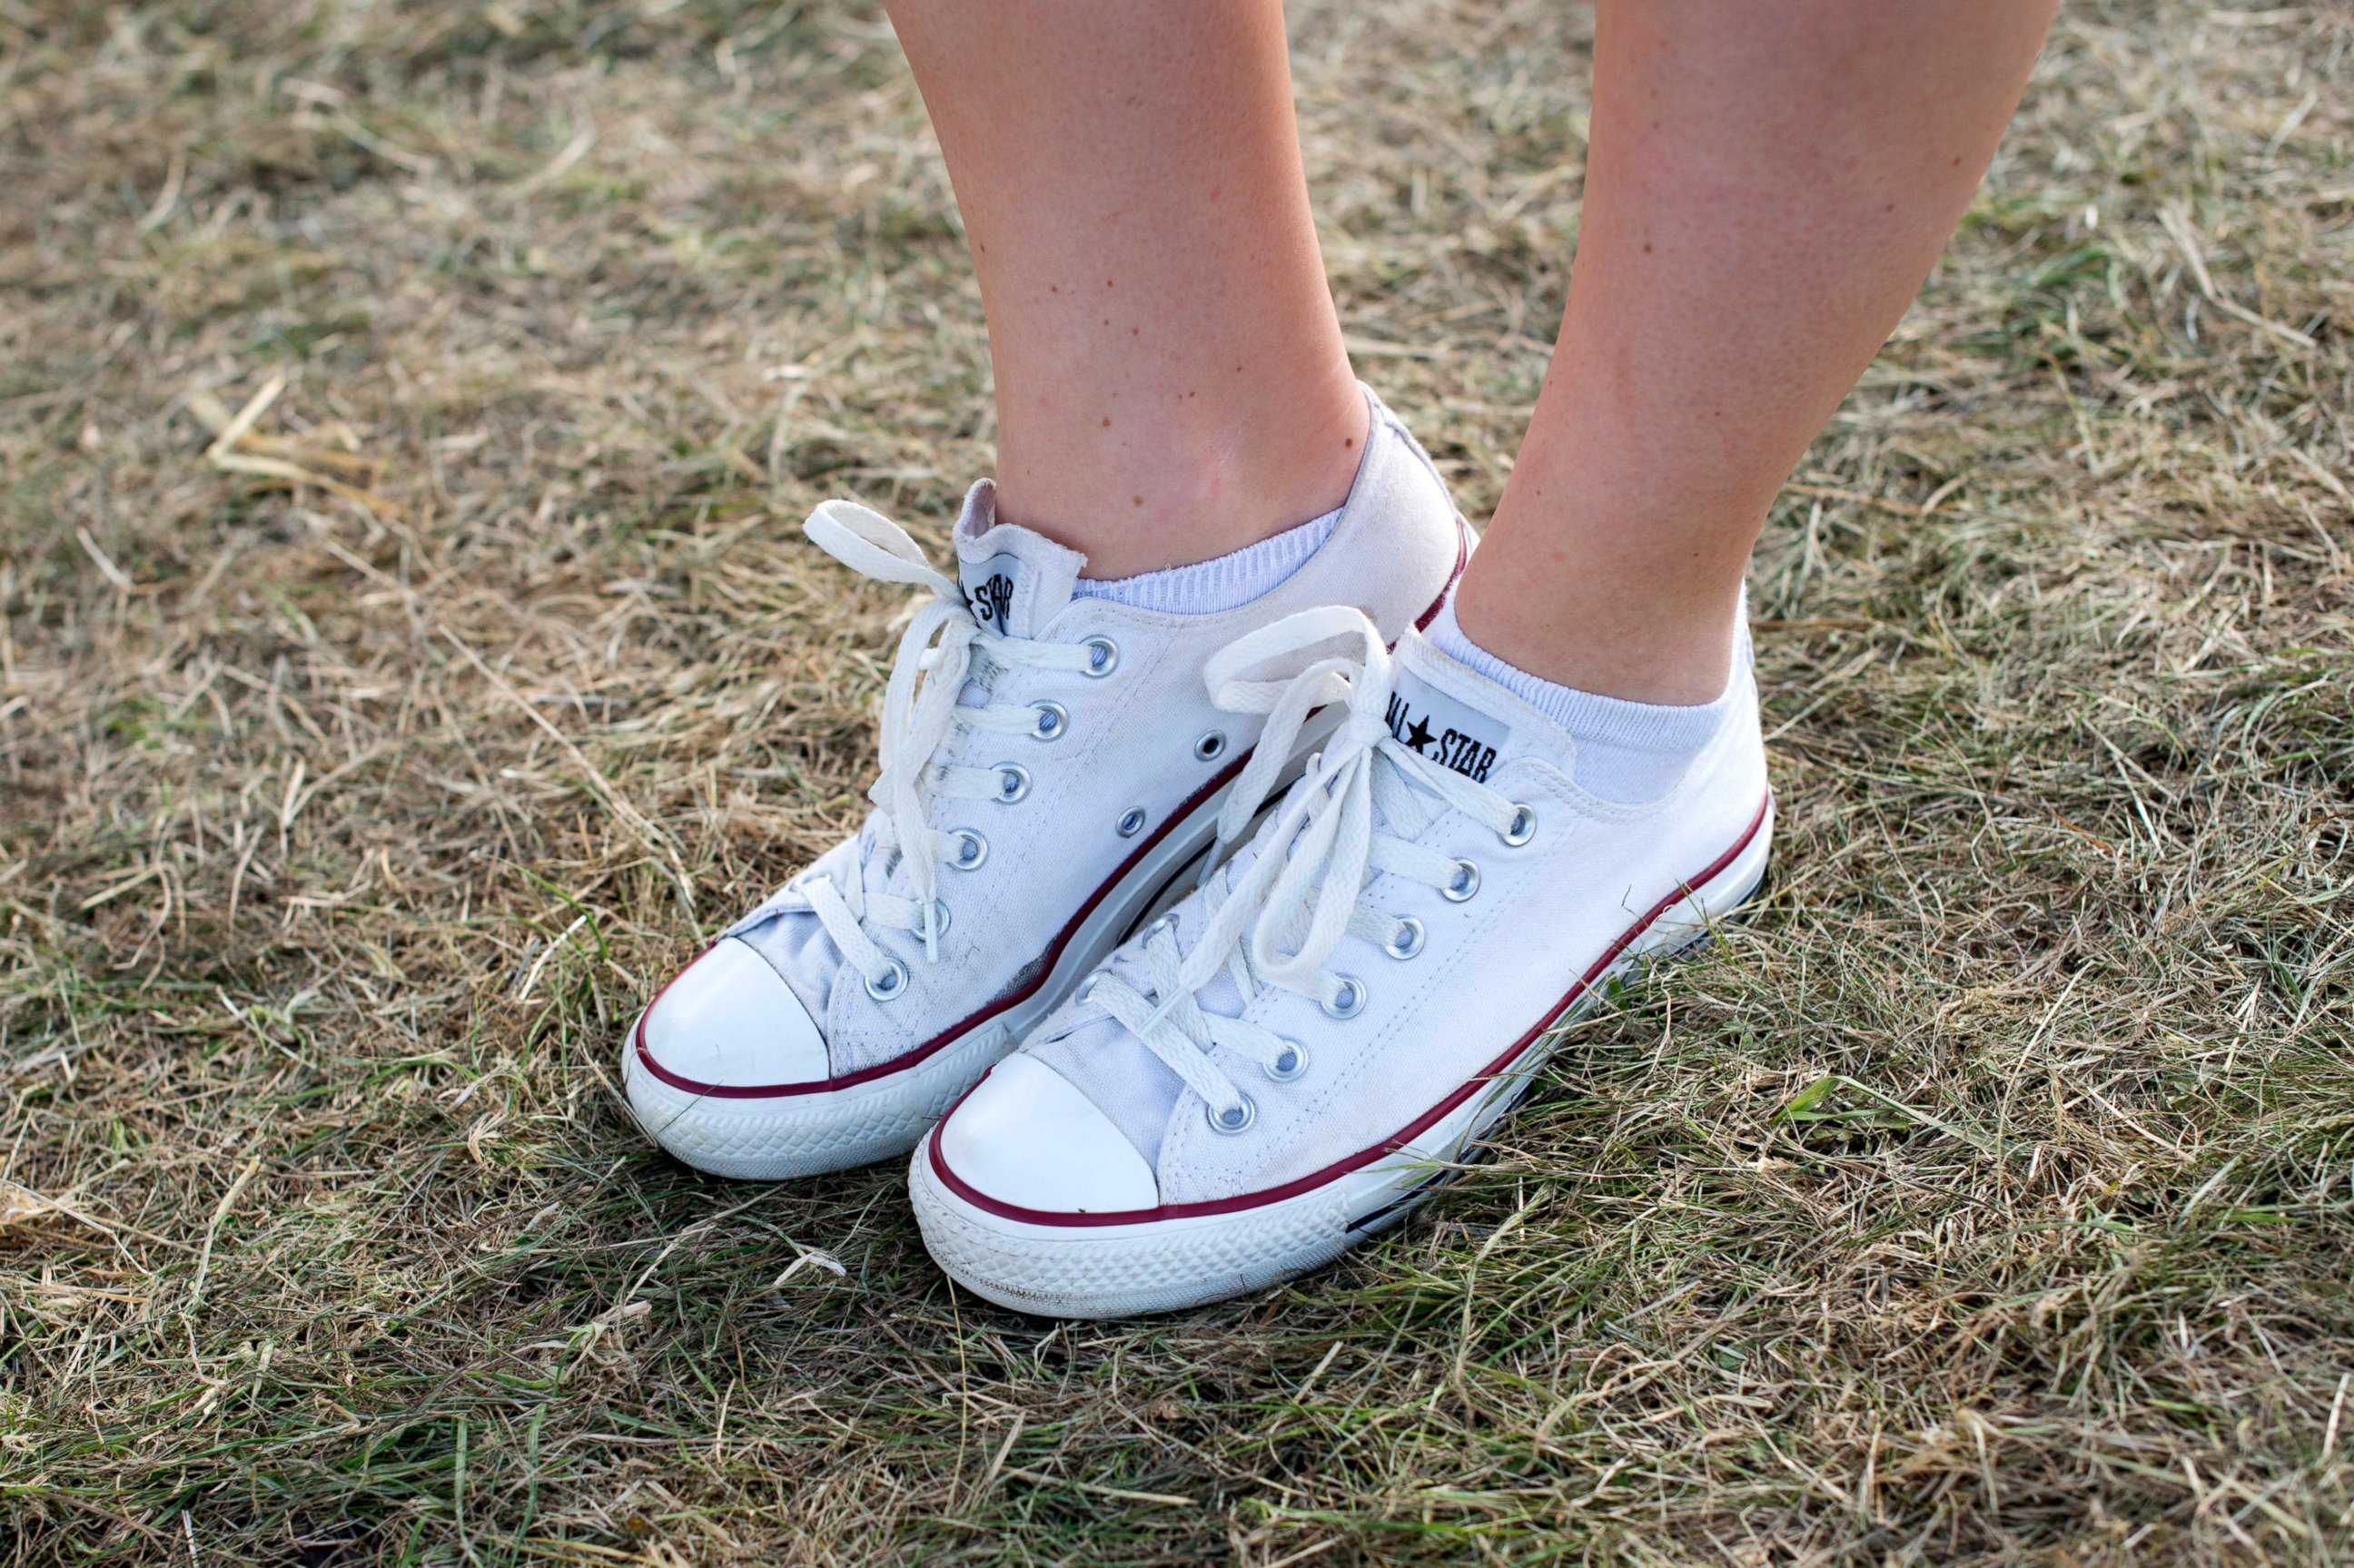 PHOTO: A pair of the original Chuck Taylor All Star shoes.